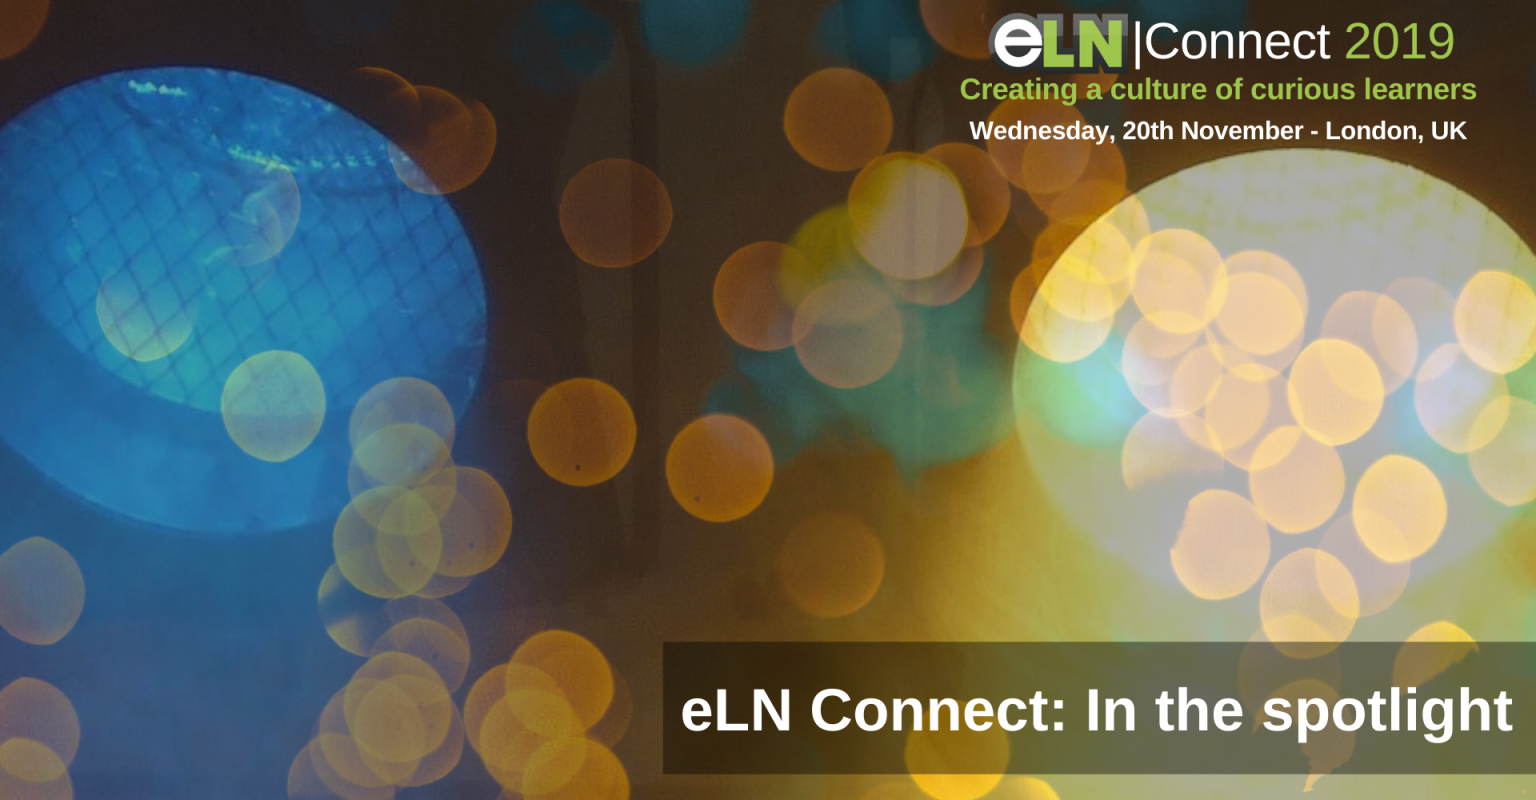 eLN Connect in the spotlight